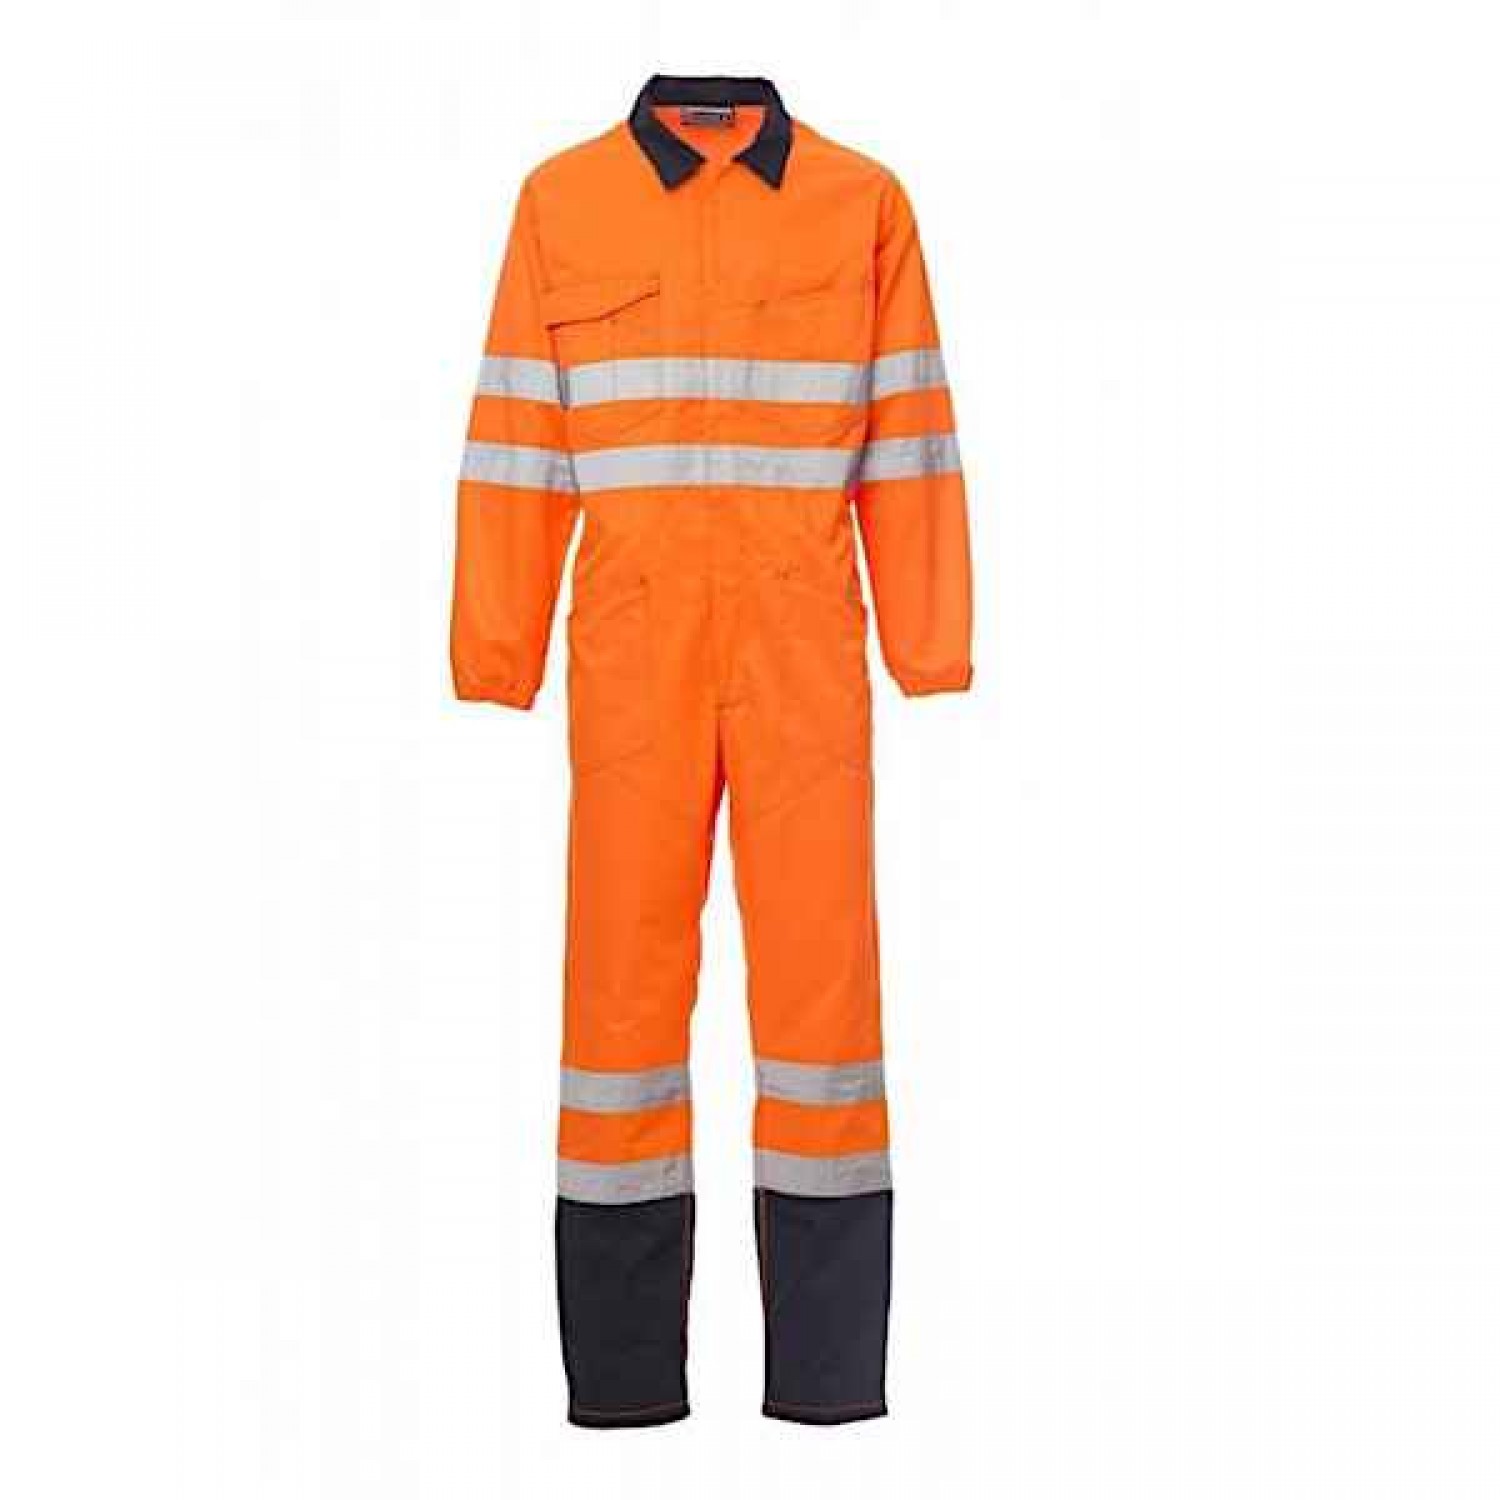 PAYPER Orange Work Coverall Full Body-Reflective Tapes